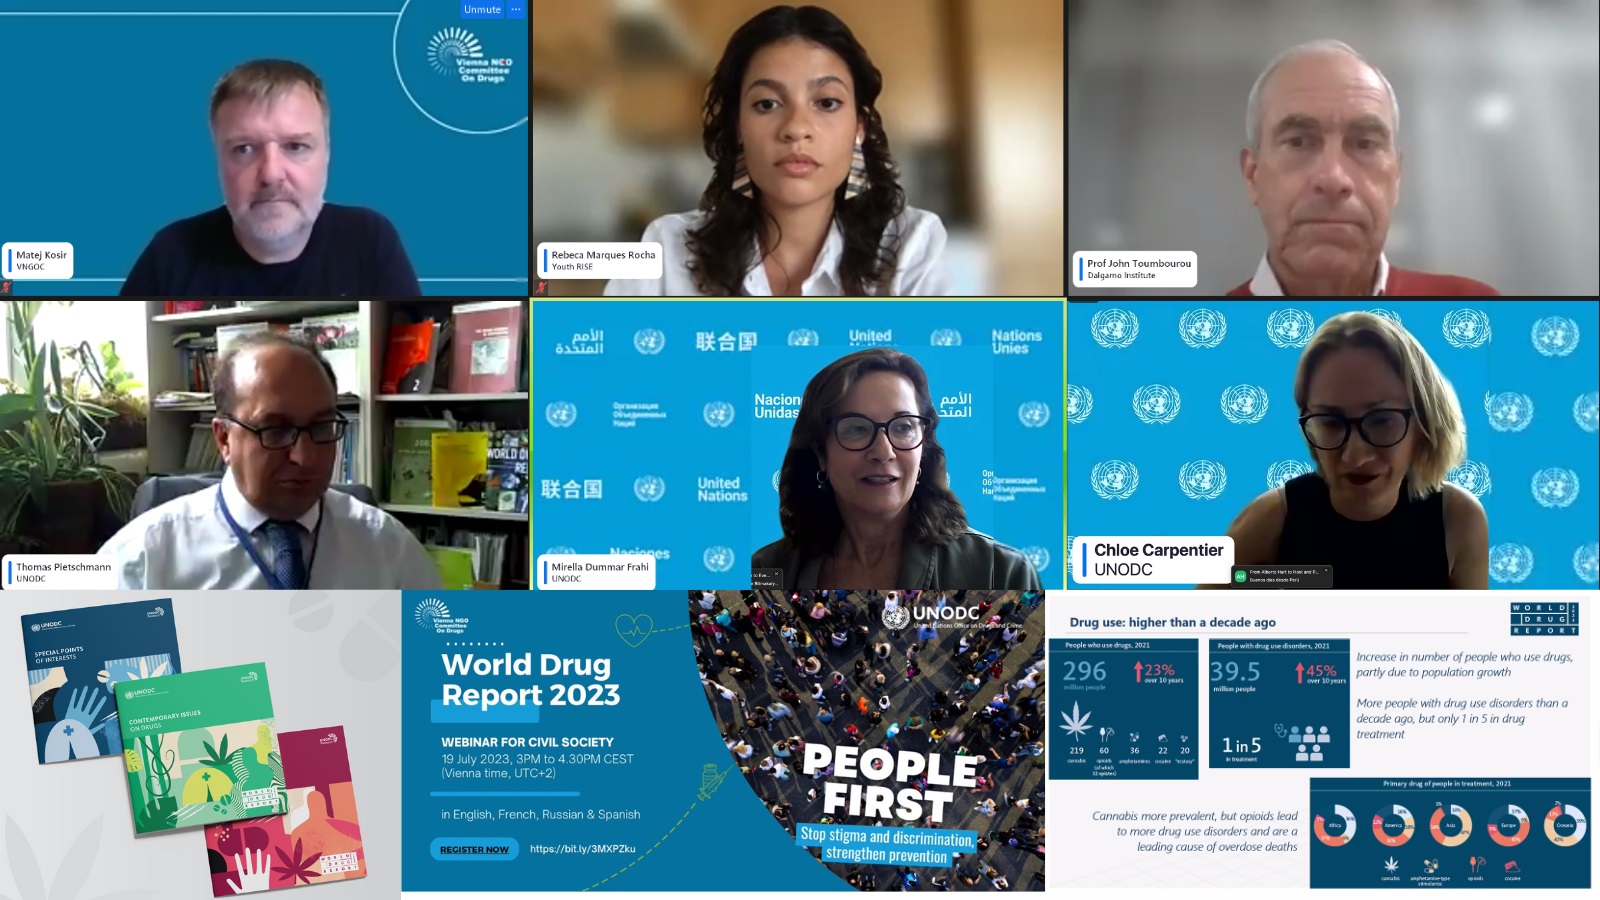 A webinar on the World Drug Report 2023 for civil society